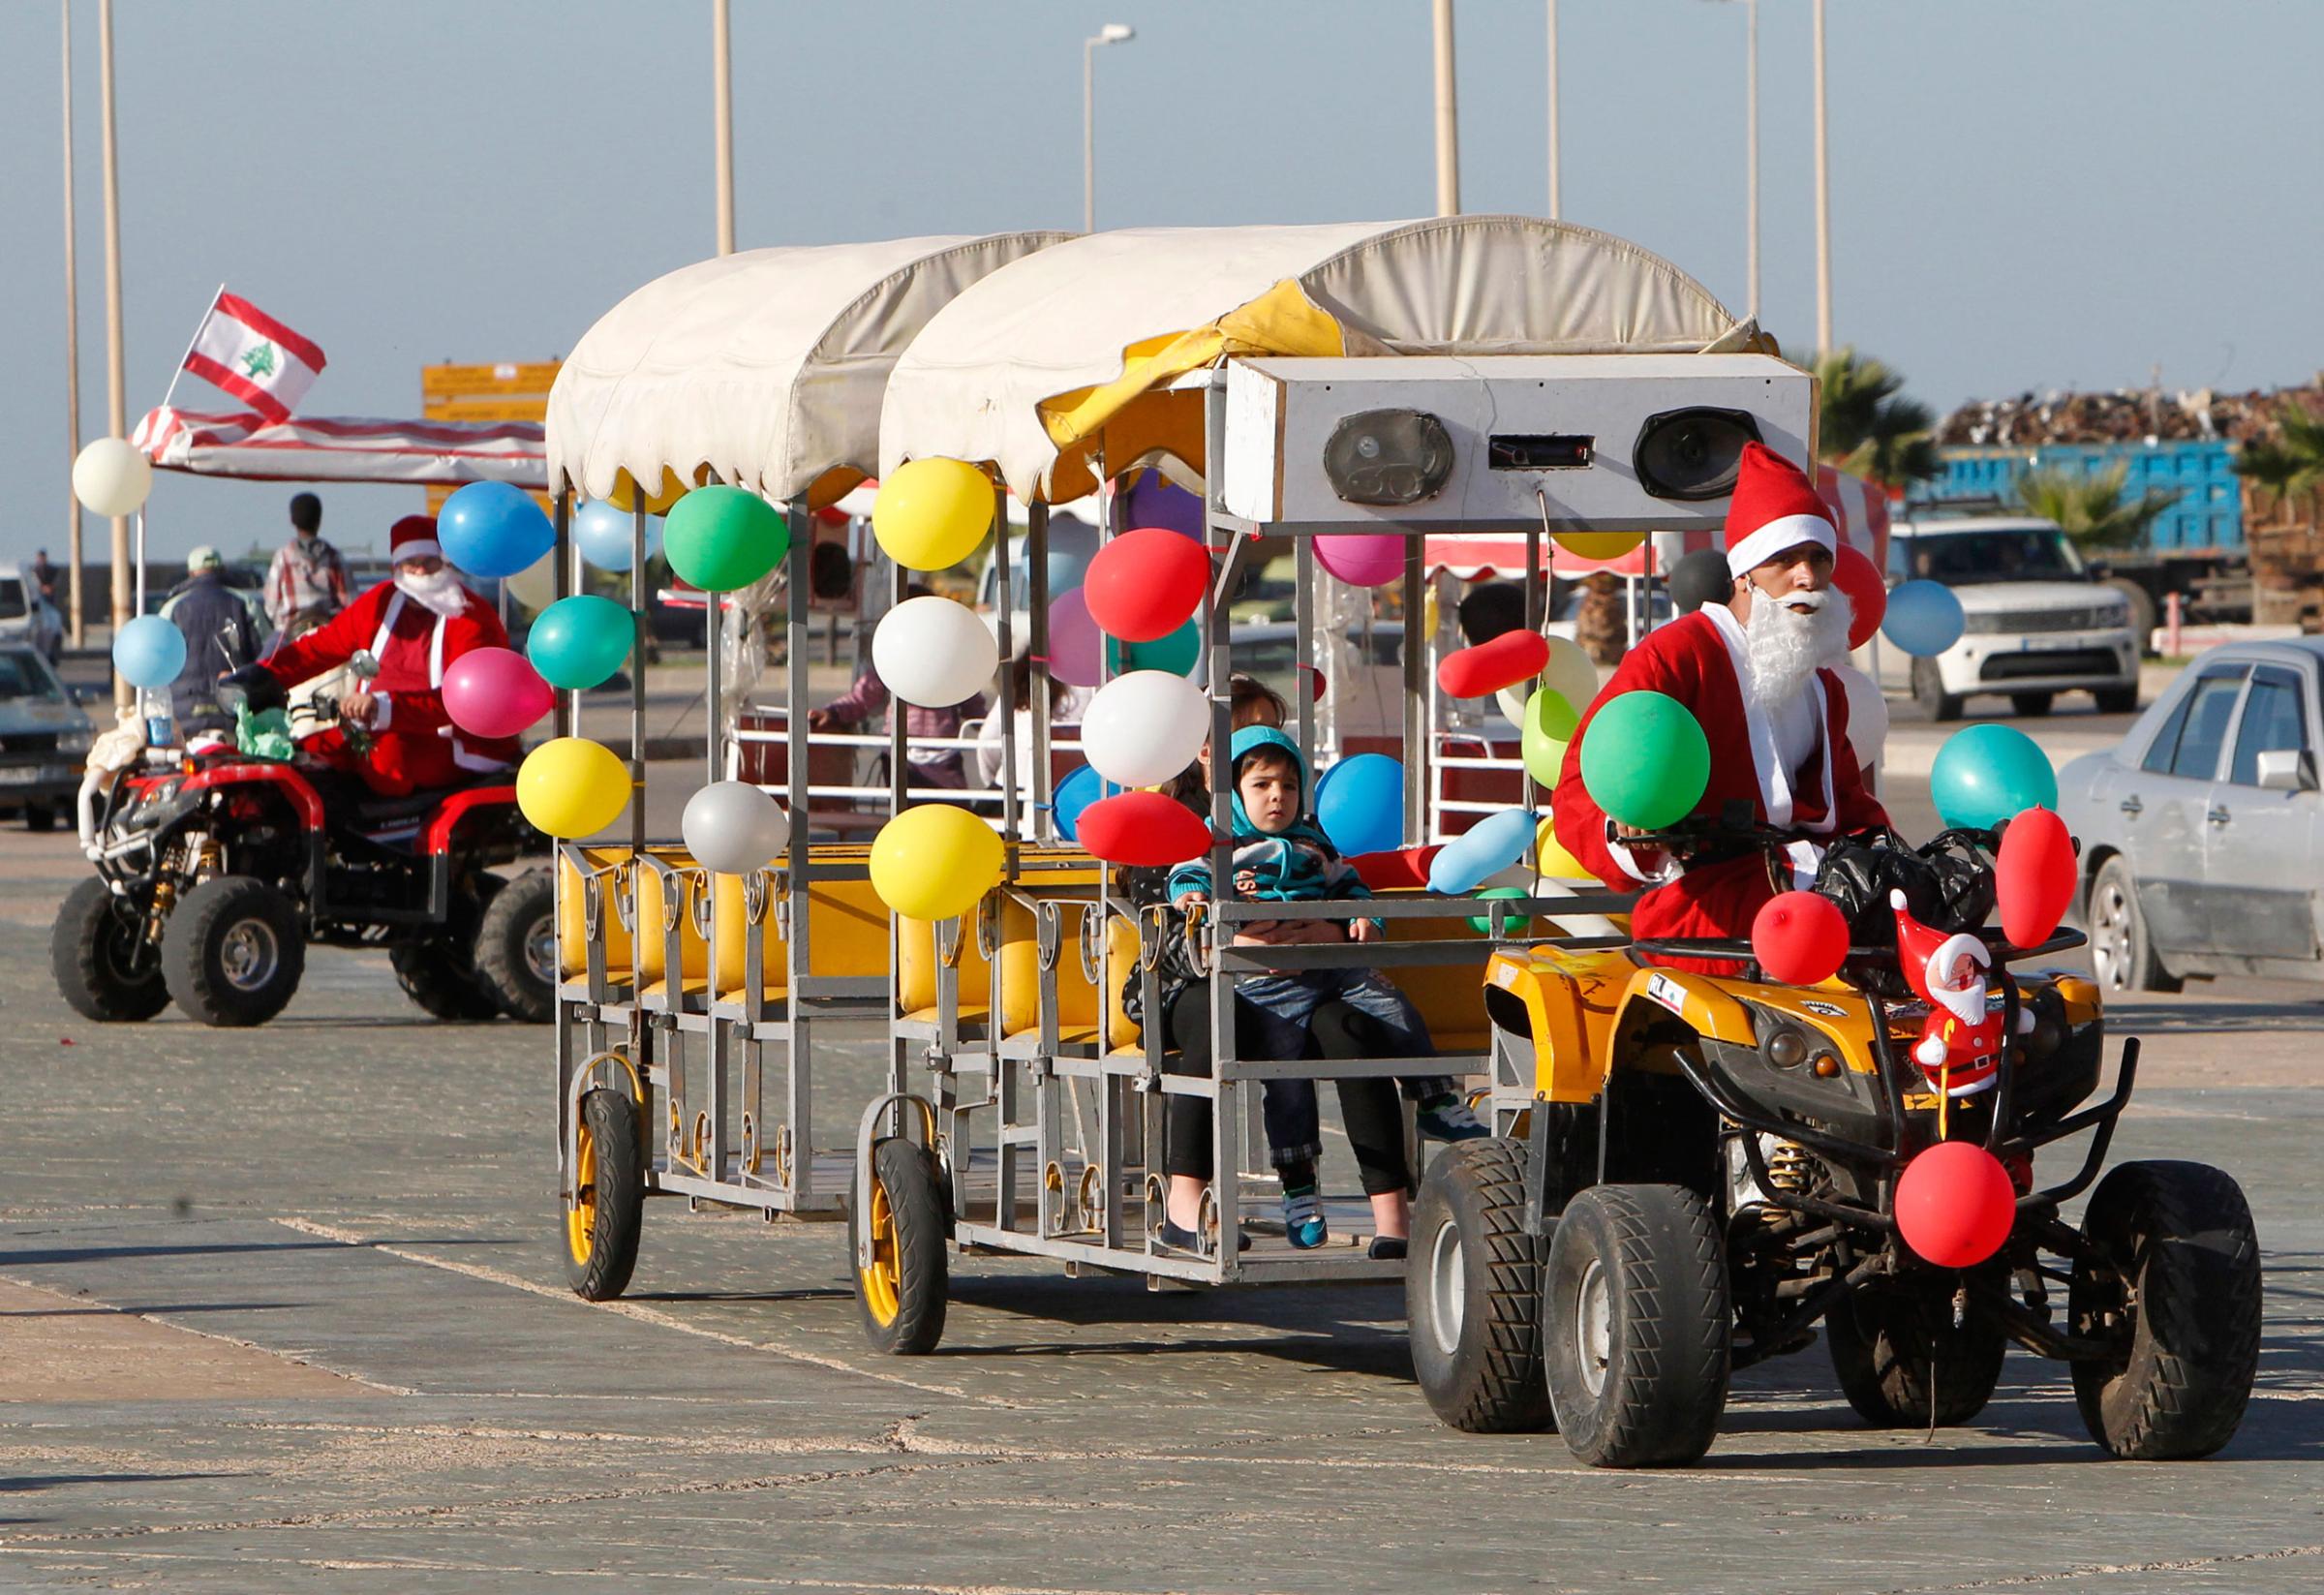 A man dressed as Santa Claus drives a vehicle during Christmas day in Sidon, South Lebanon on Dec. 25, 2014.